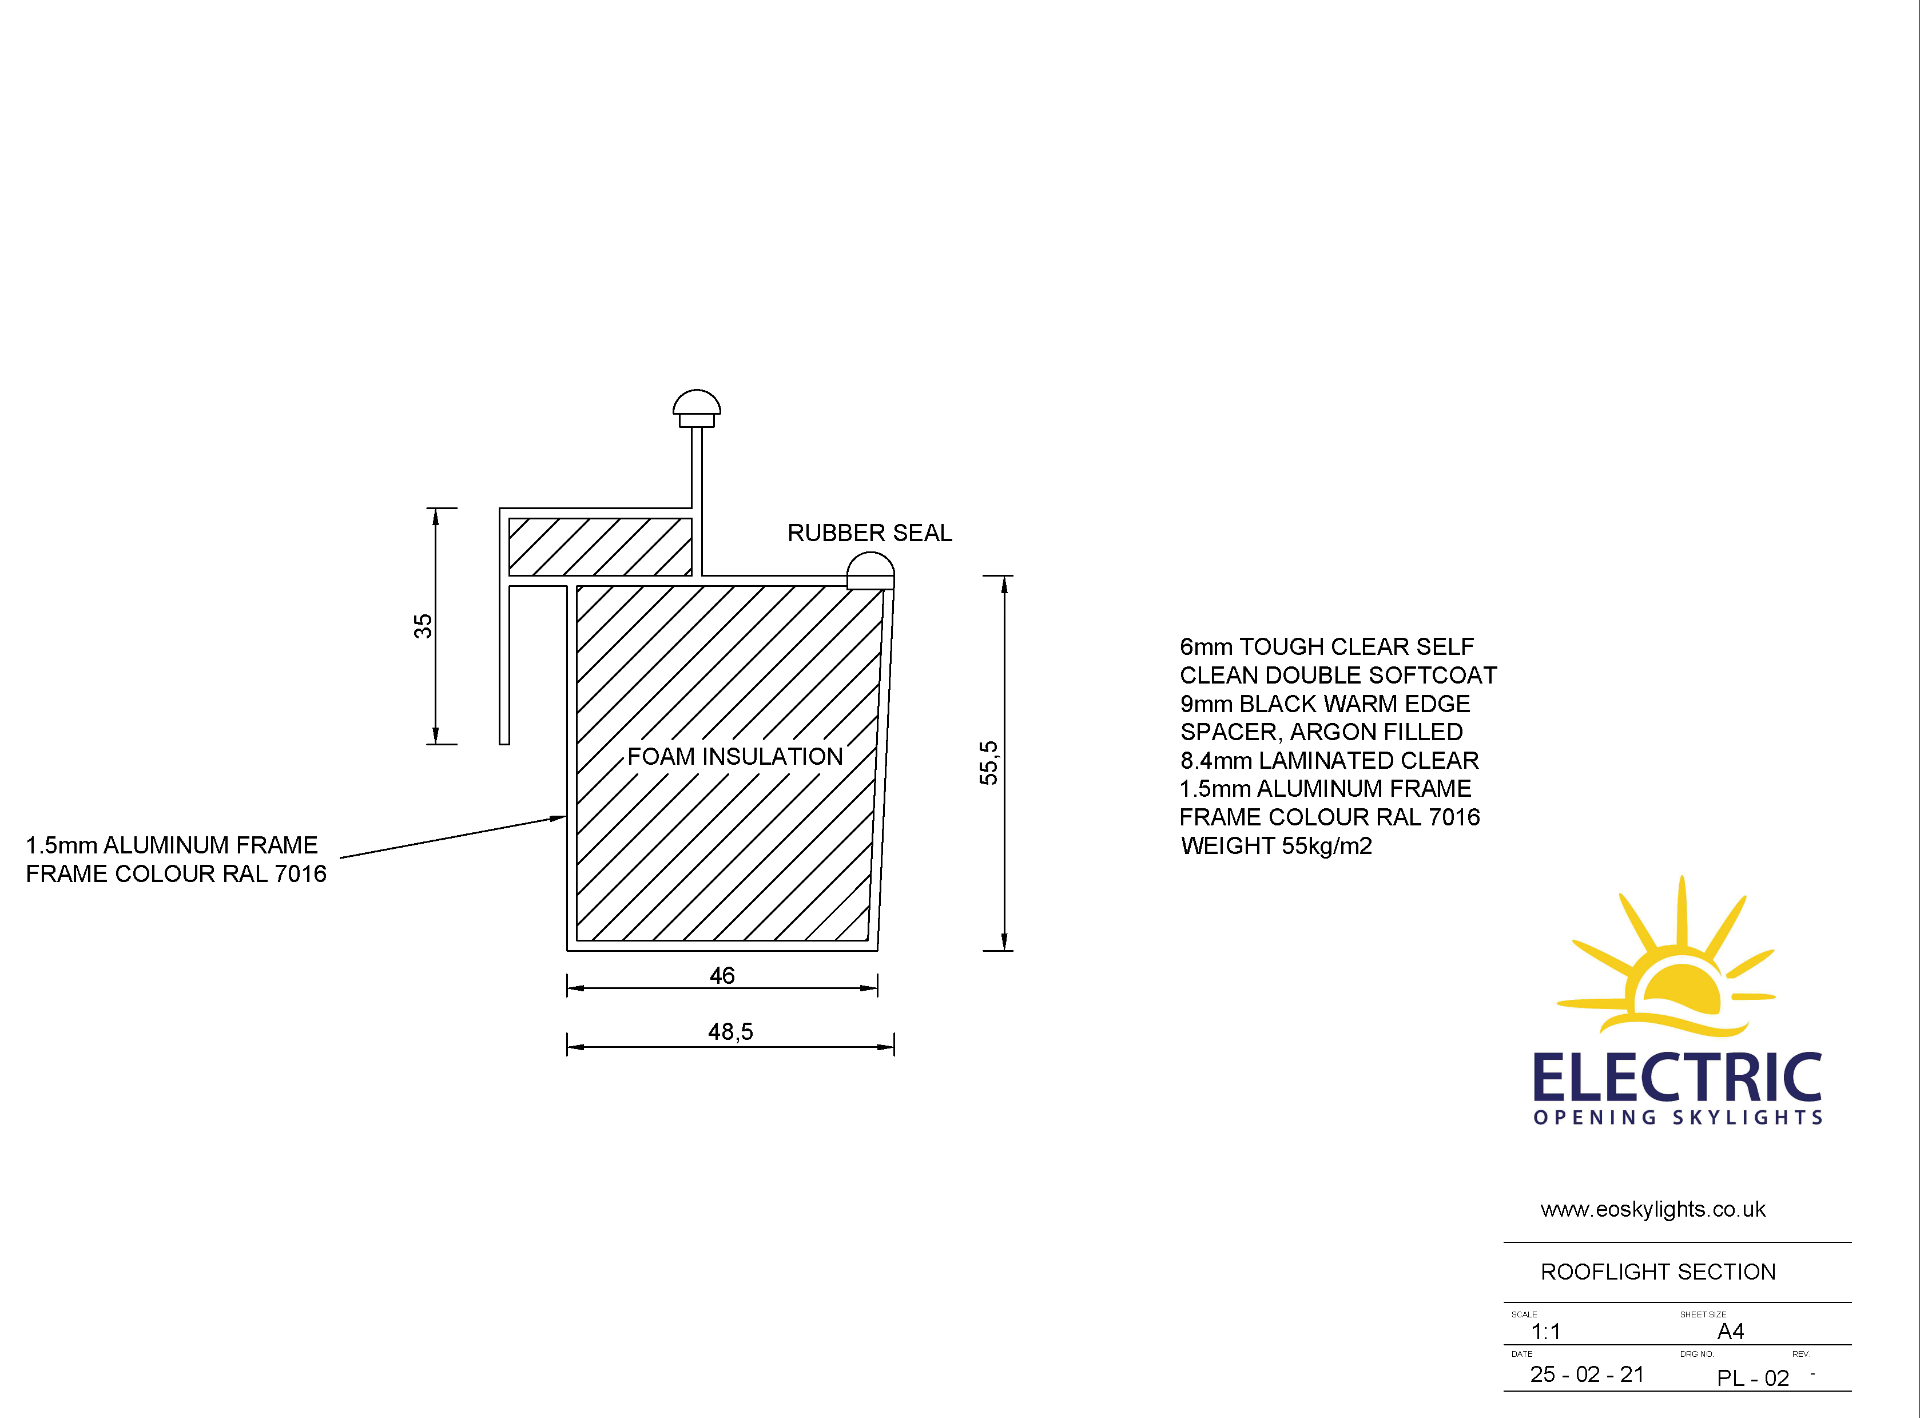 Panoroof (EOS) Electric Opening Skylight 600x900mm - Aluminiun Frame Double Glazed Laminated Self- - Image 5 of 6